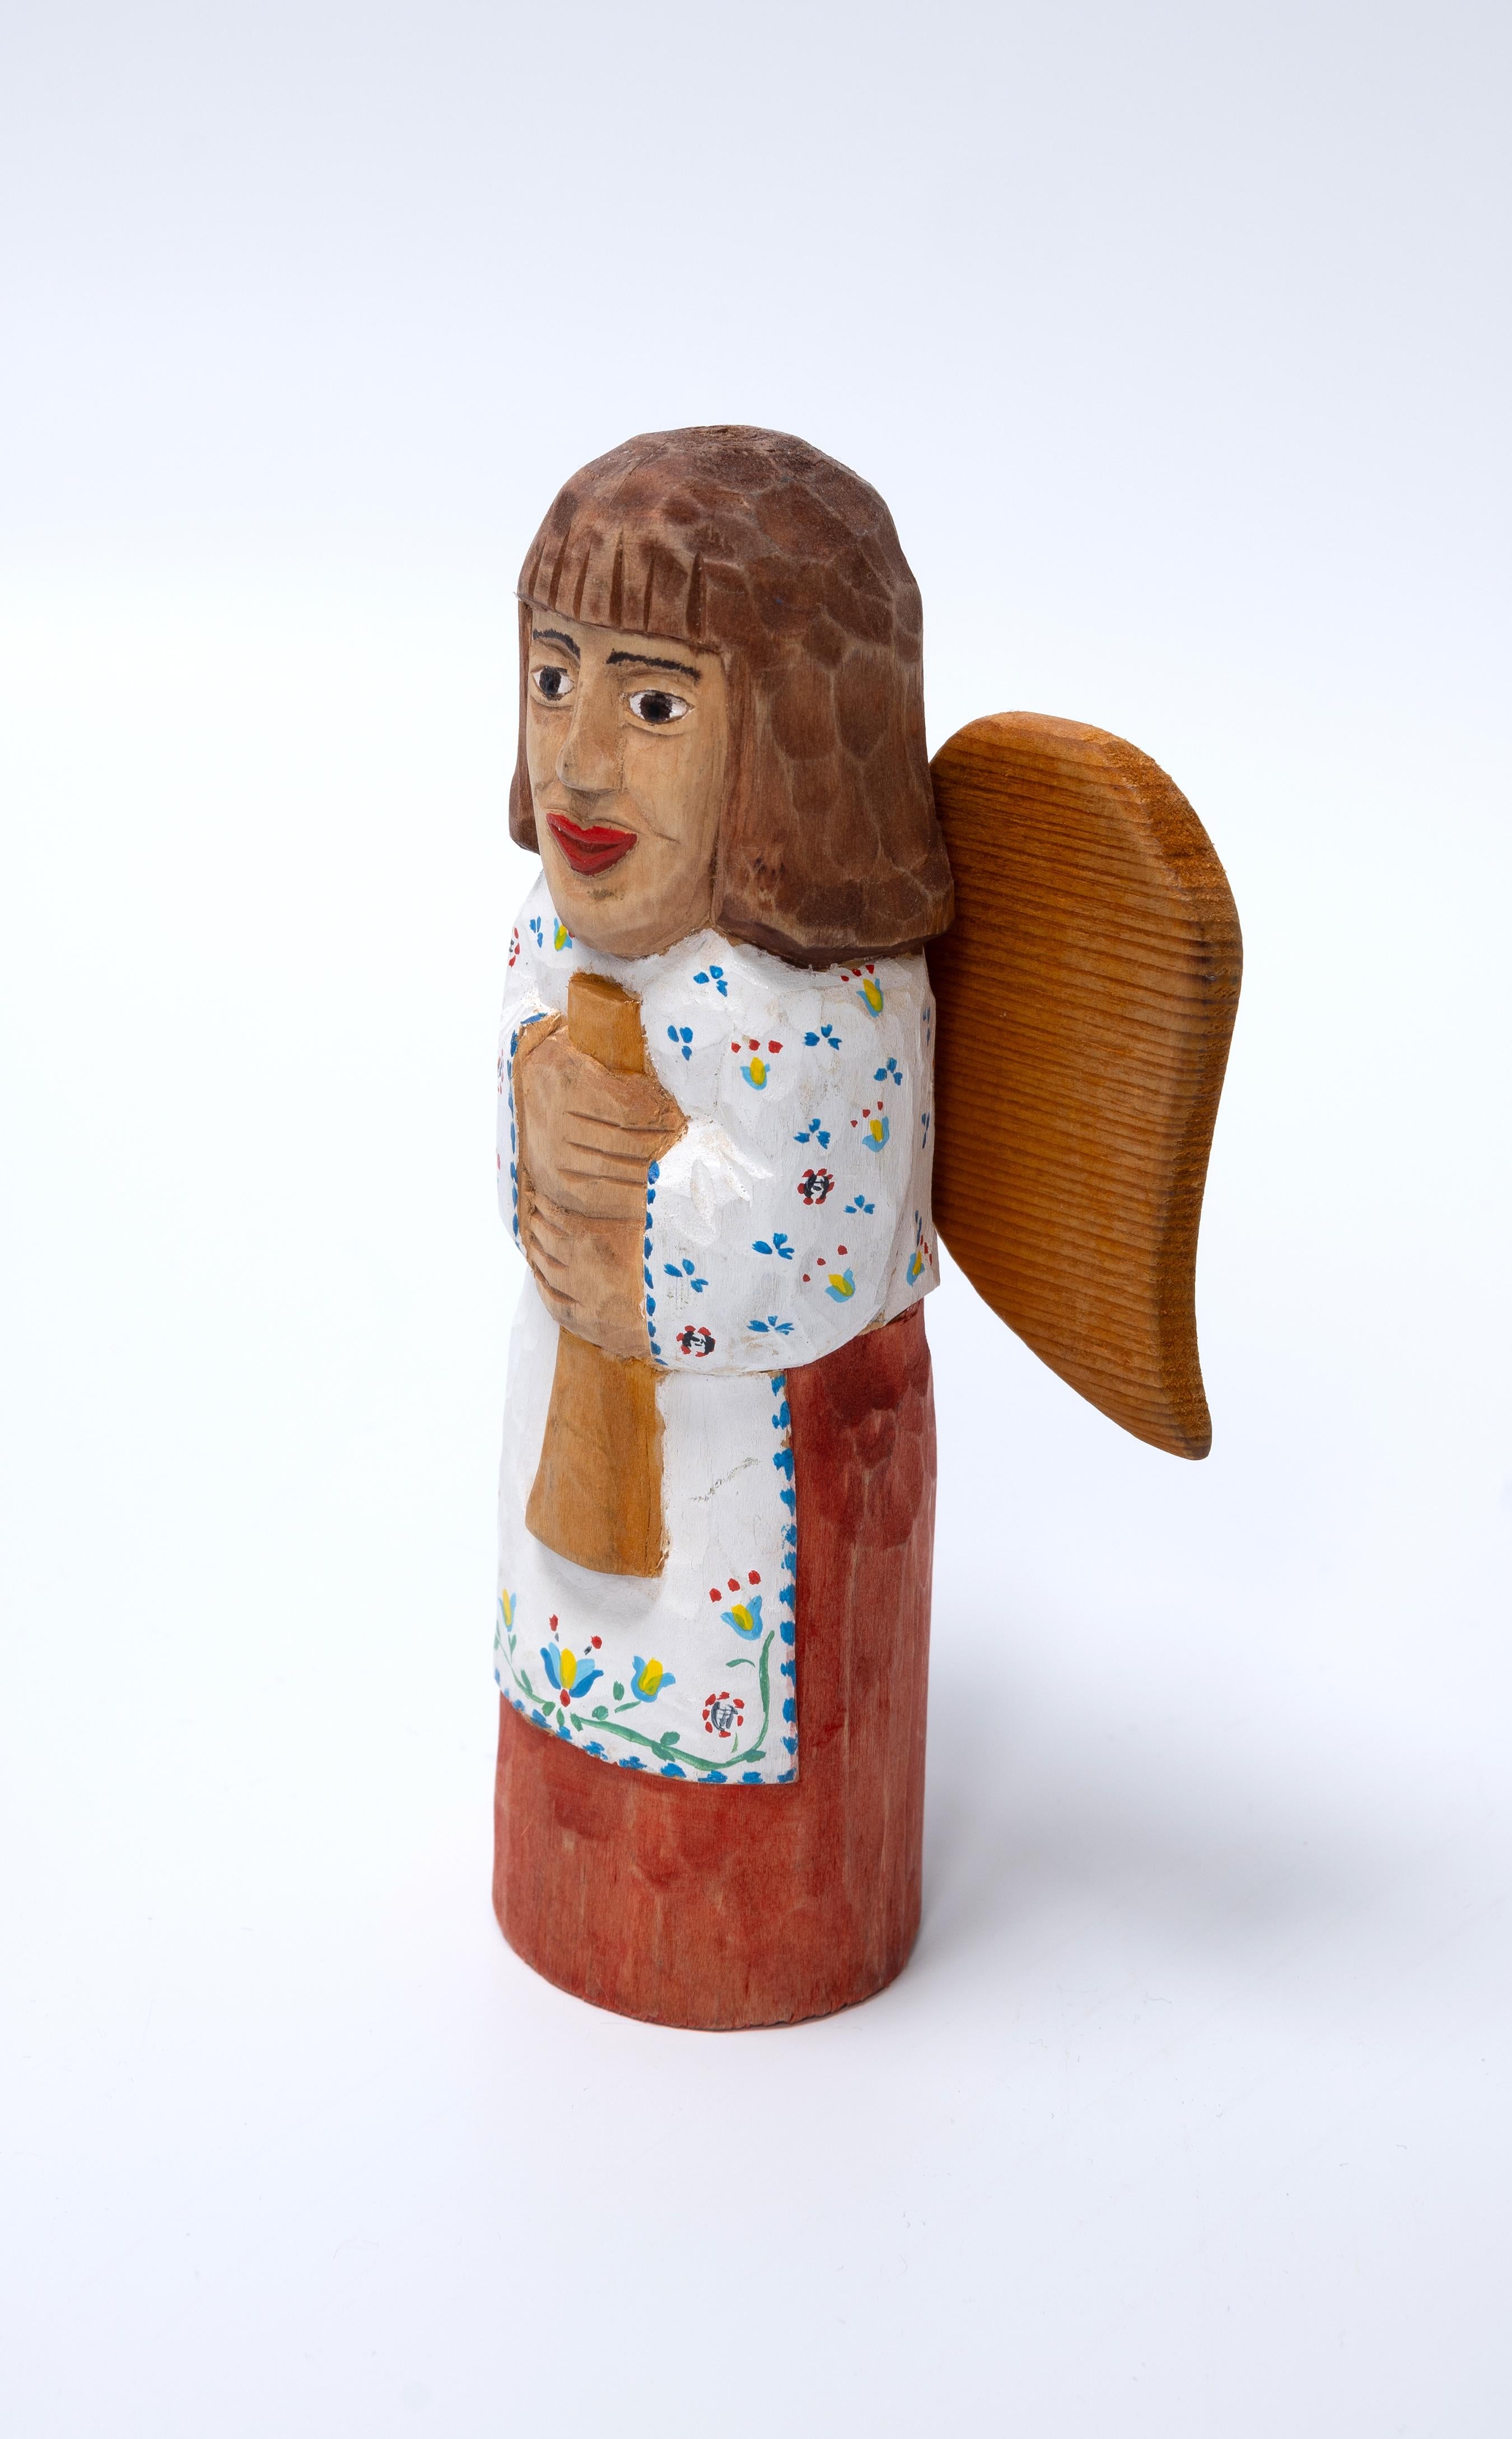 Hand Carved Folk Art  Willow Wood Angel 
Poland C.1950 
Willow votive figurine in the form of an angel. Hand painted.
Rustic folk art for a touch of whimsy.
In very good condition commensurate of age.